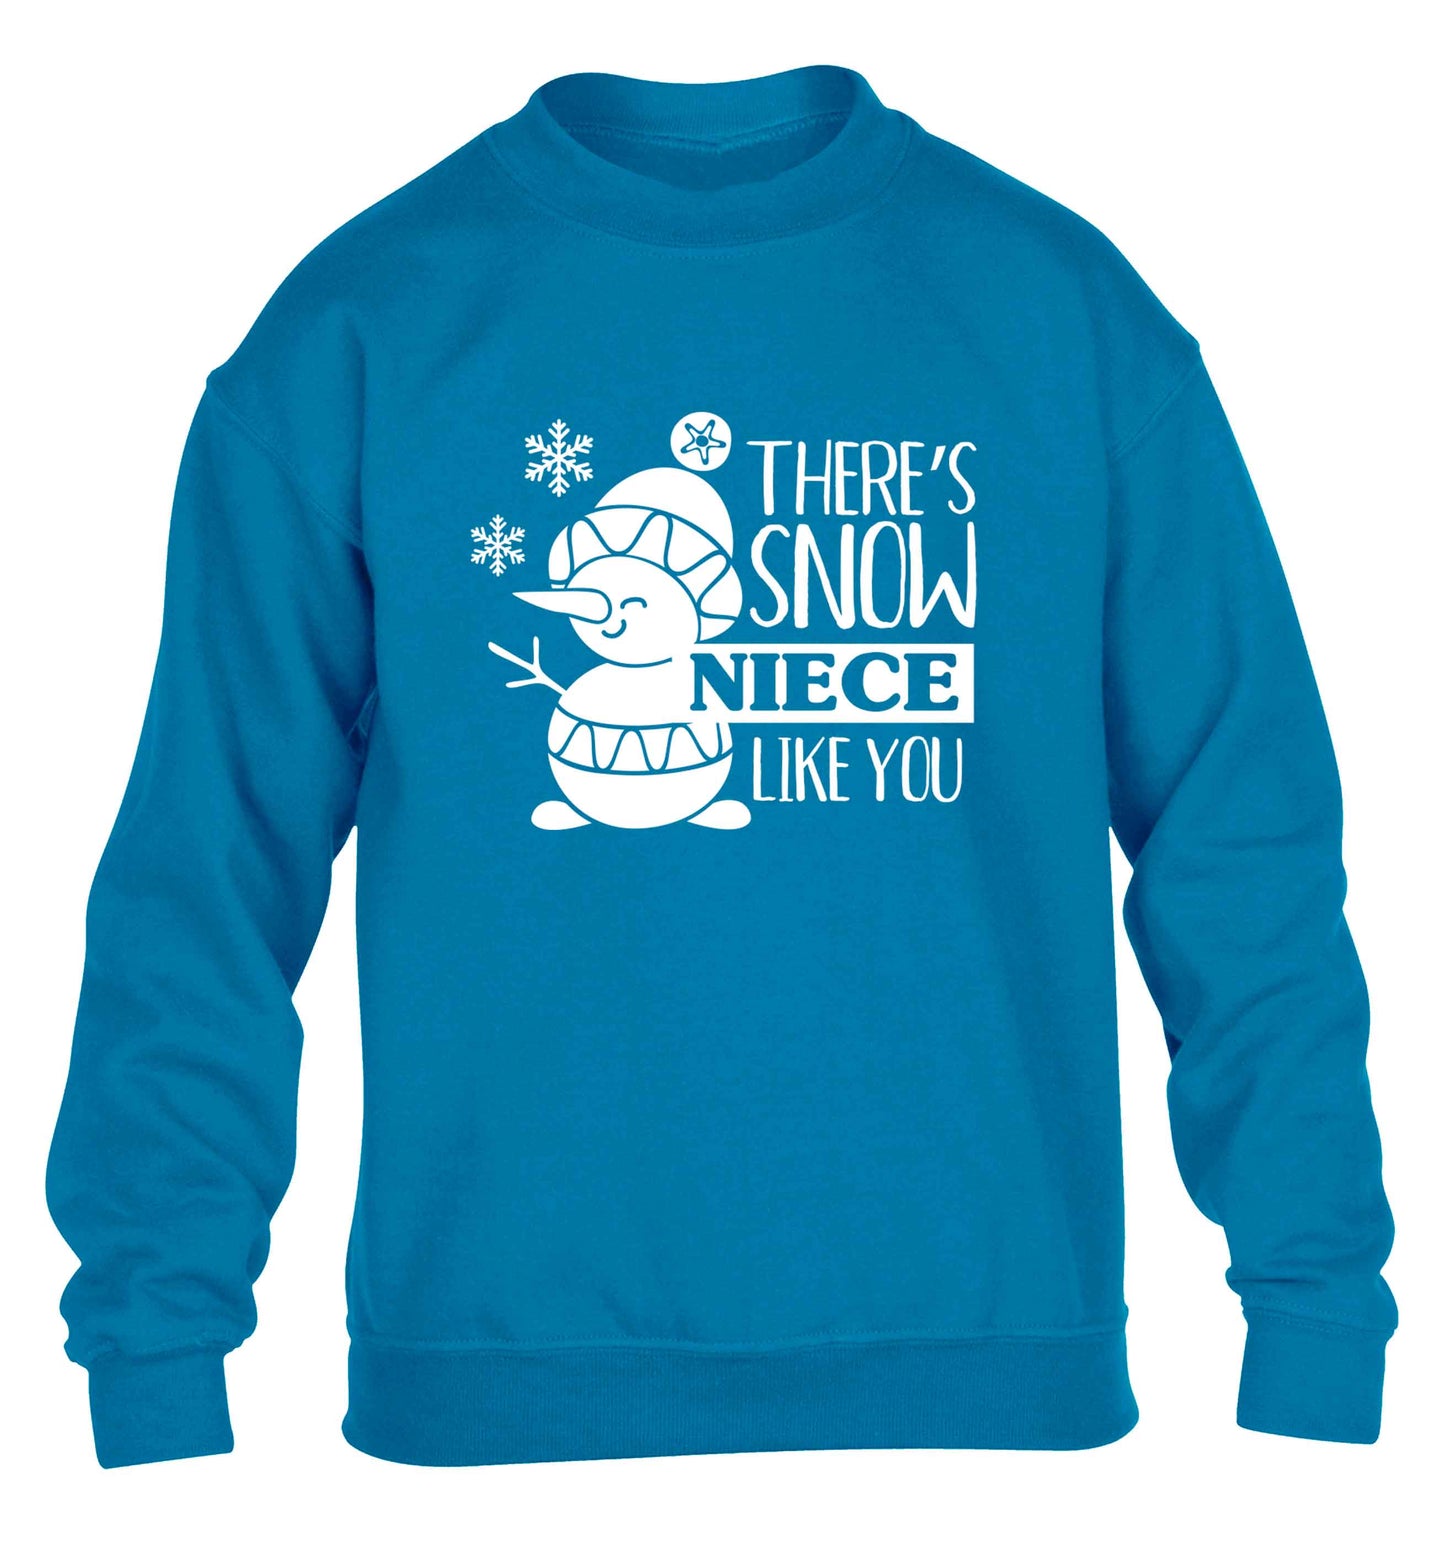 There's snow niece like you children's blue sweater 12-13 Years